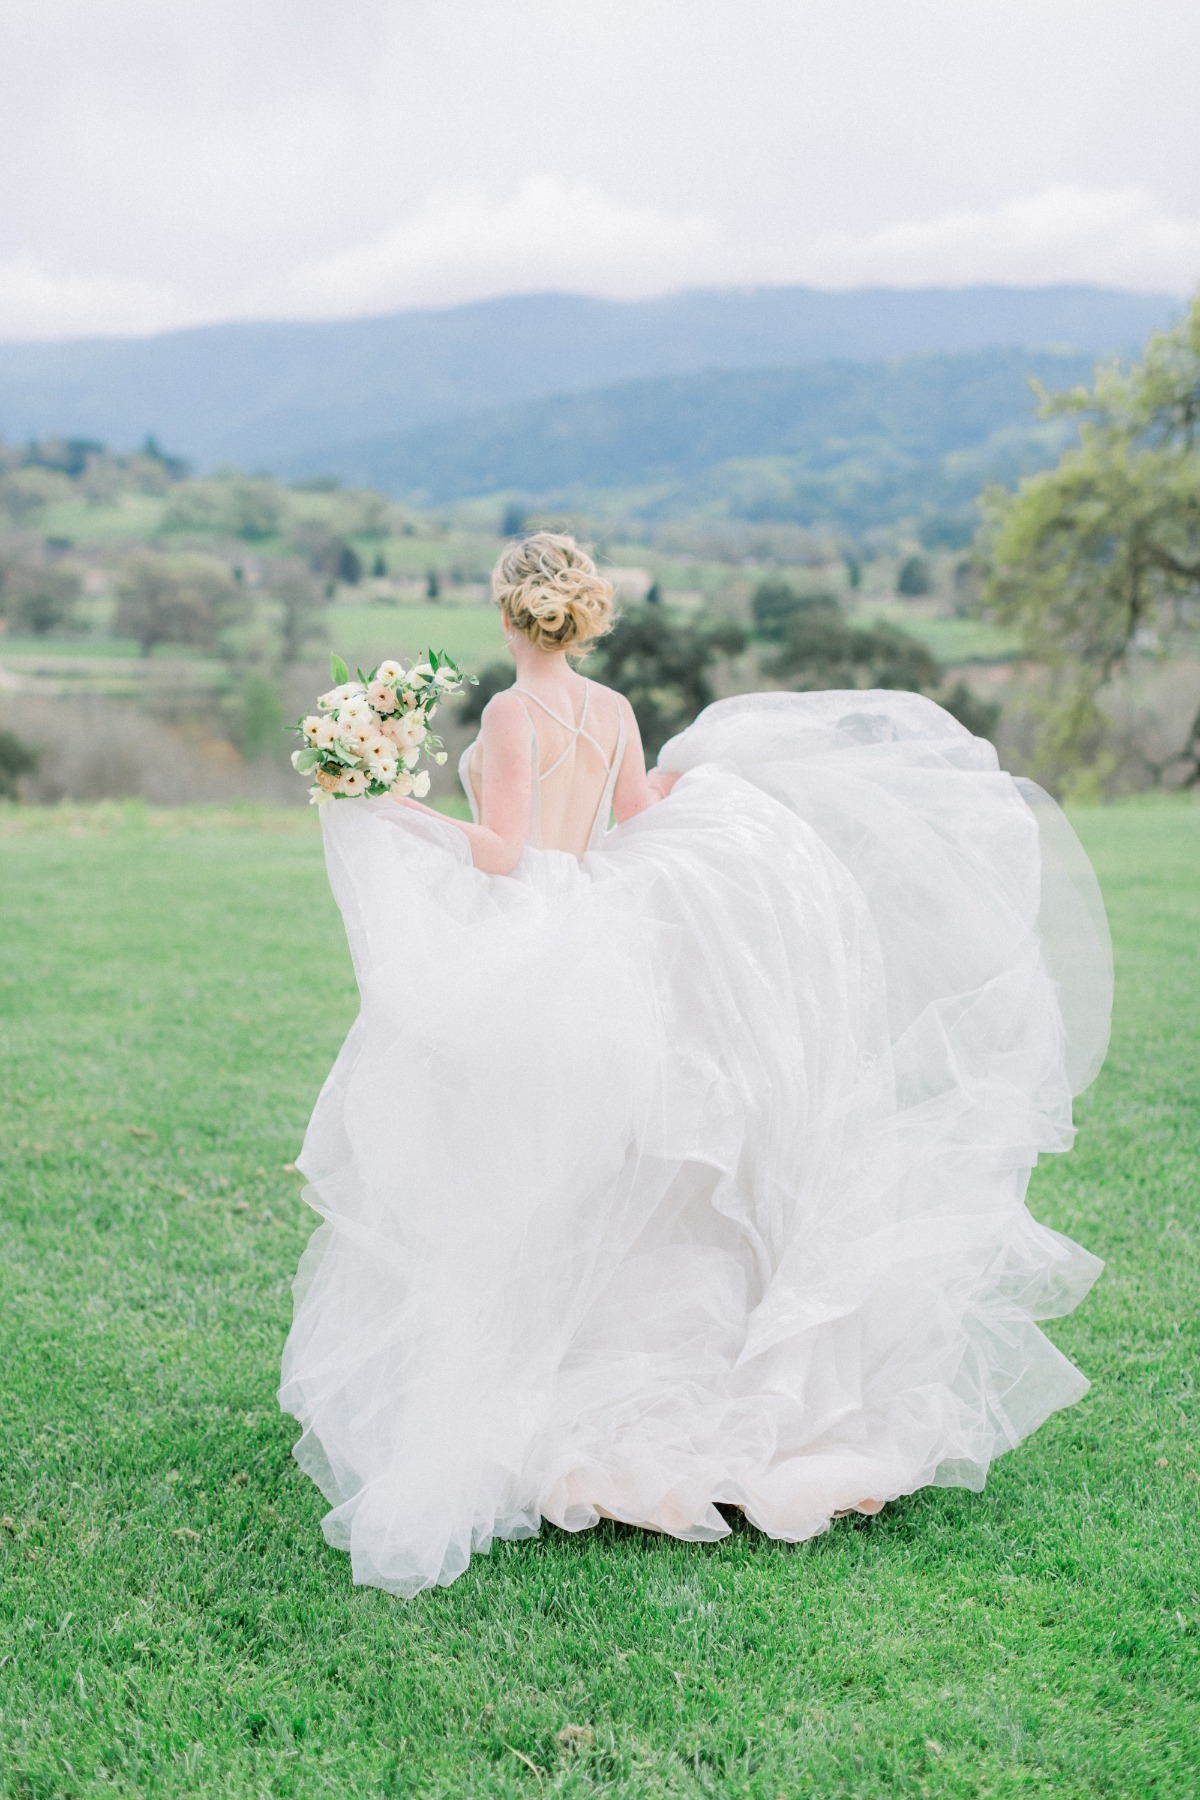 Haley Paige wedding gown with bouquet by Tyler Speier Events